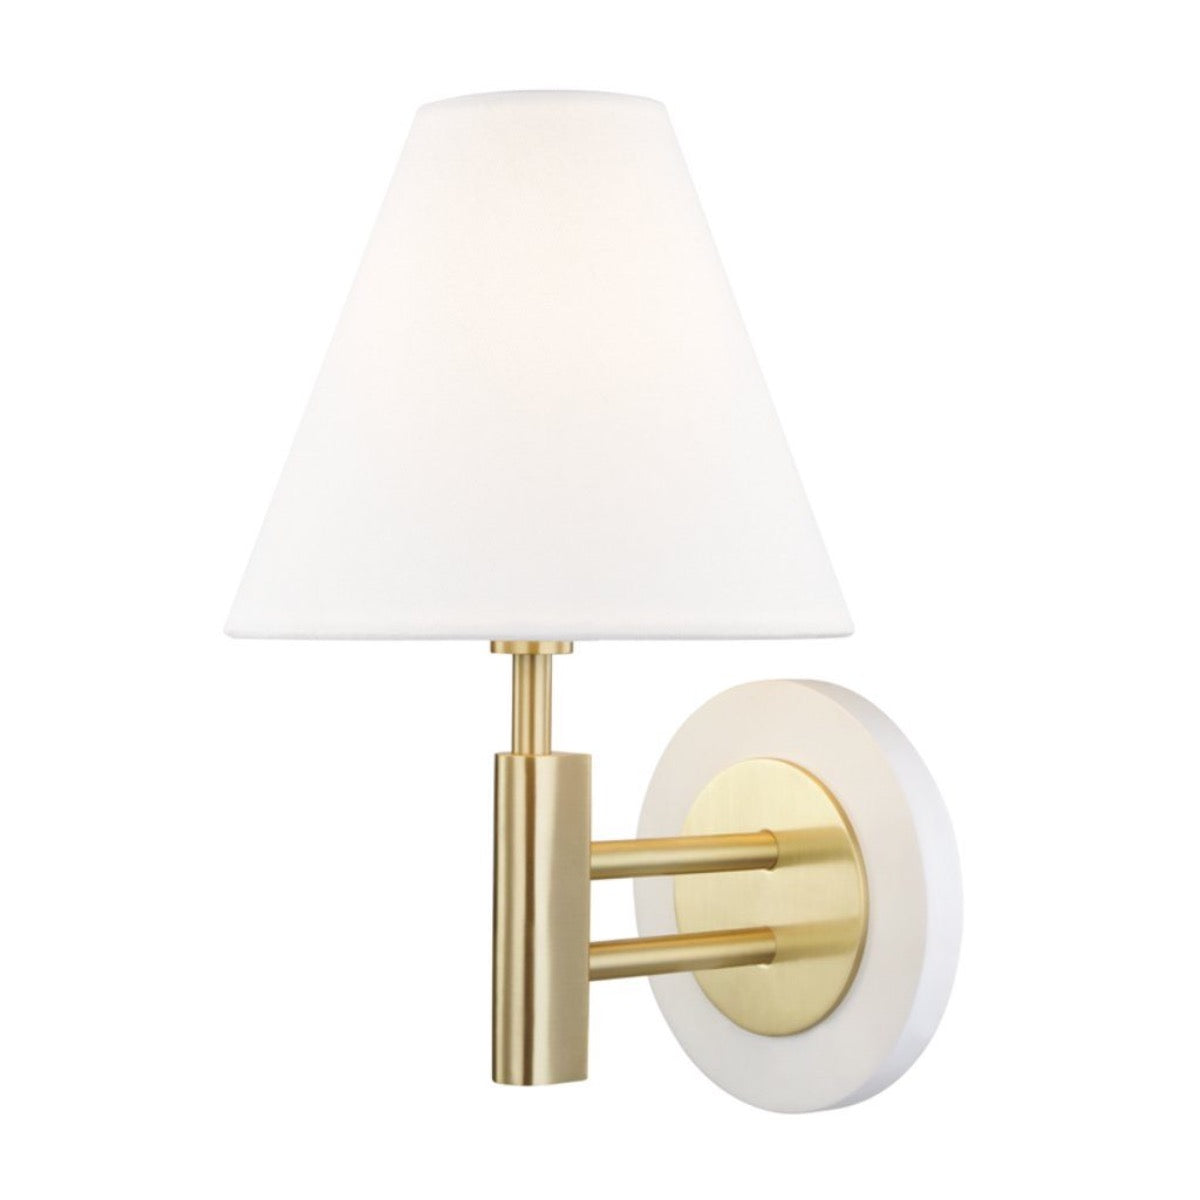 Western Sconce Aged Brass/Soft White. Left angle view.